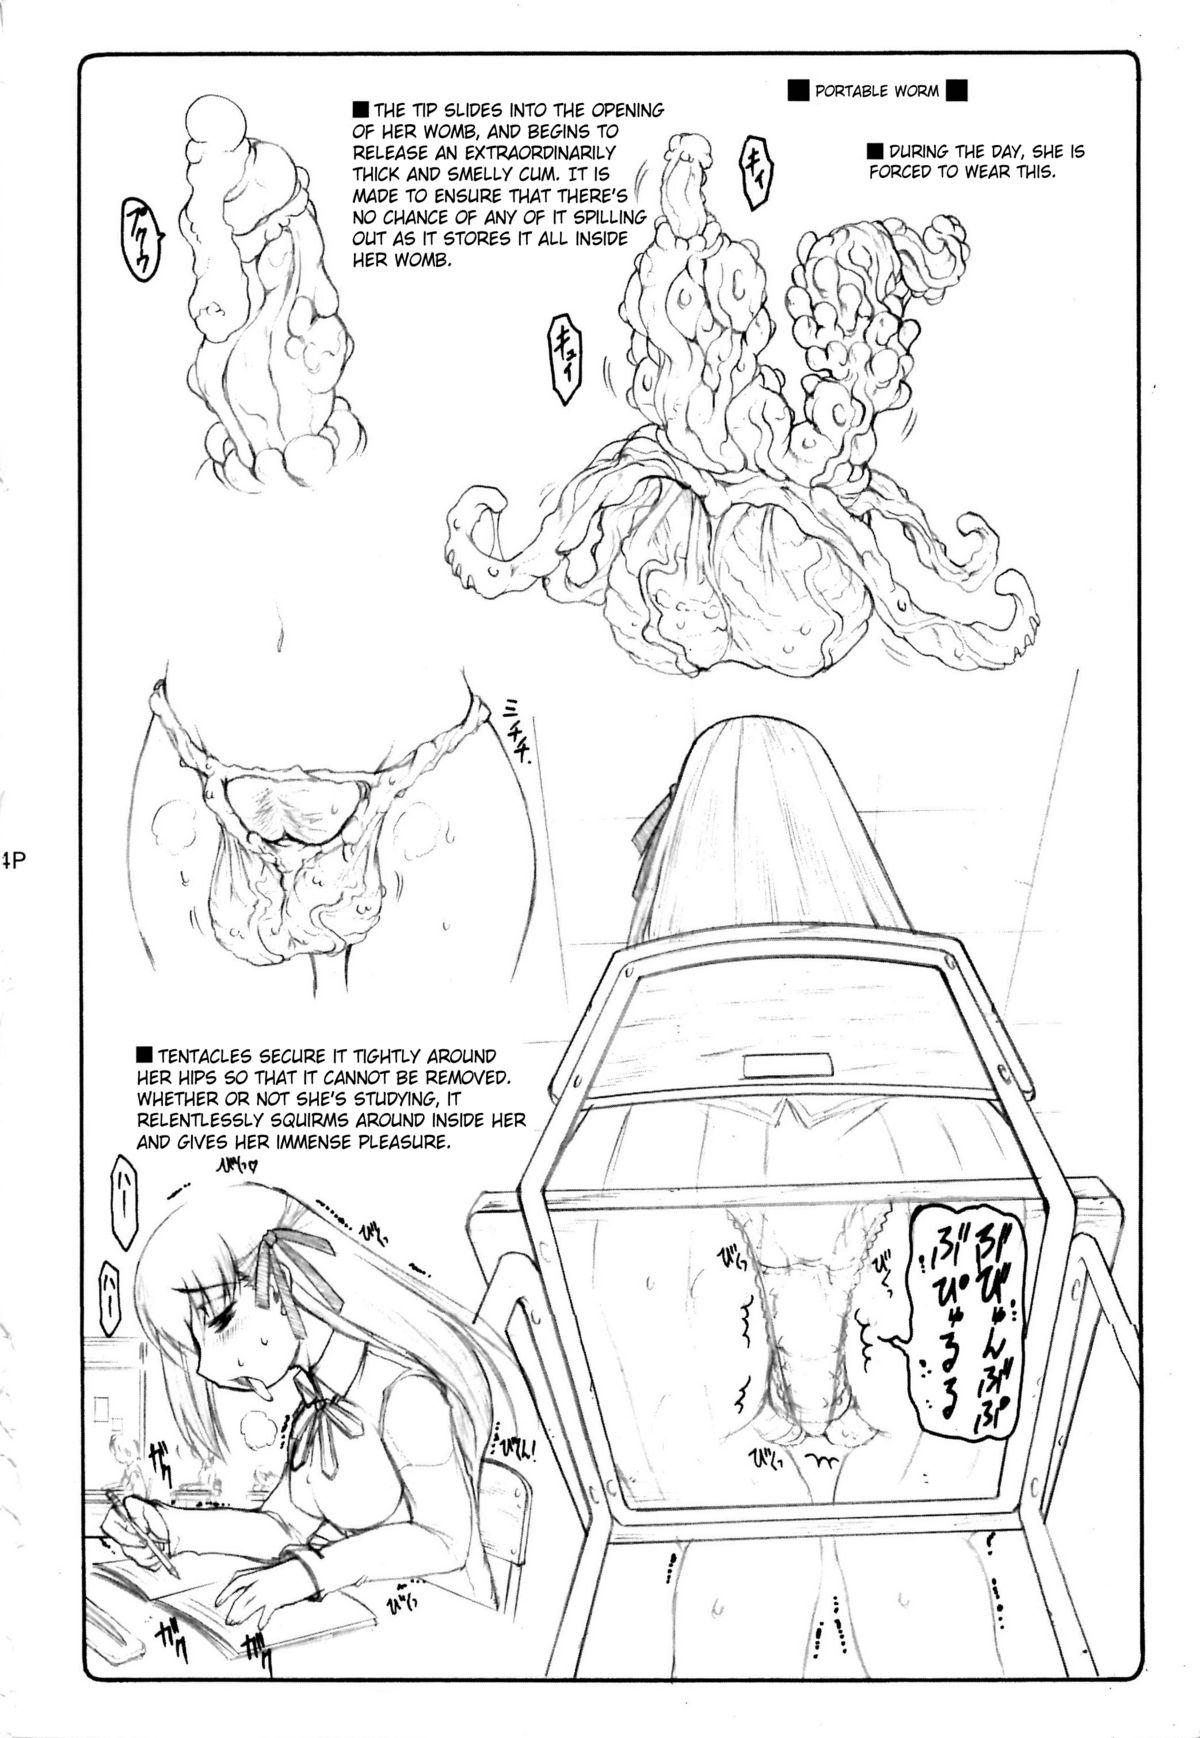 Chupa Kotori 4 & 6 Extra Pages - Fate stay night Nipples - Page 6